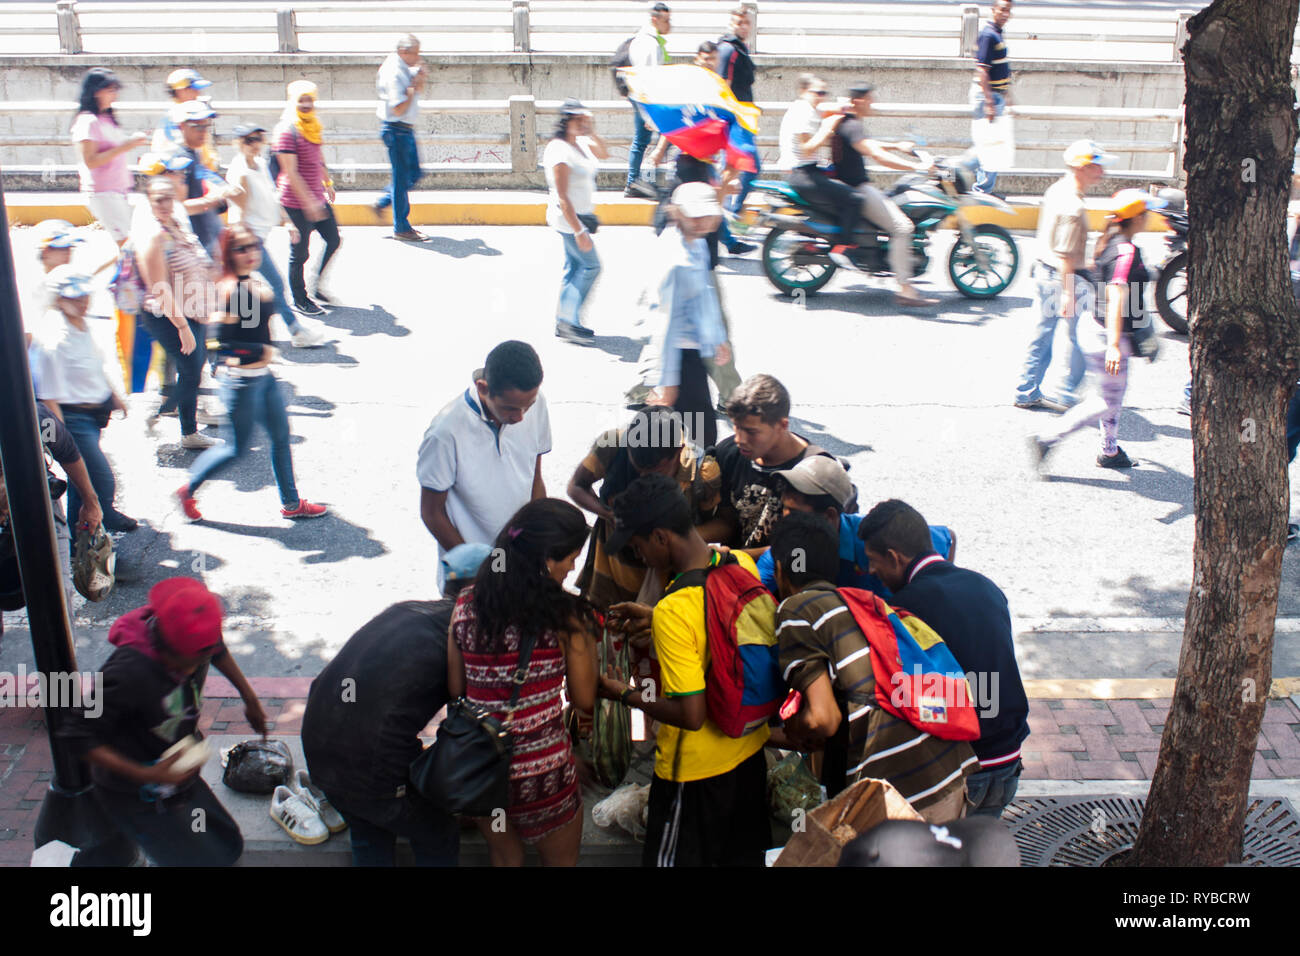 Demonstrators walk by while a group of homeless persons try to find some food in the garbage during a march  to protest against Nicolás Maduro. Stock Photo